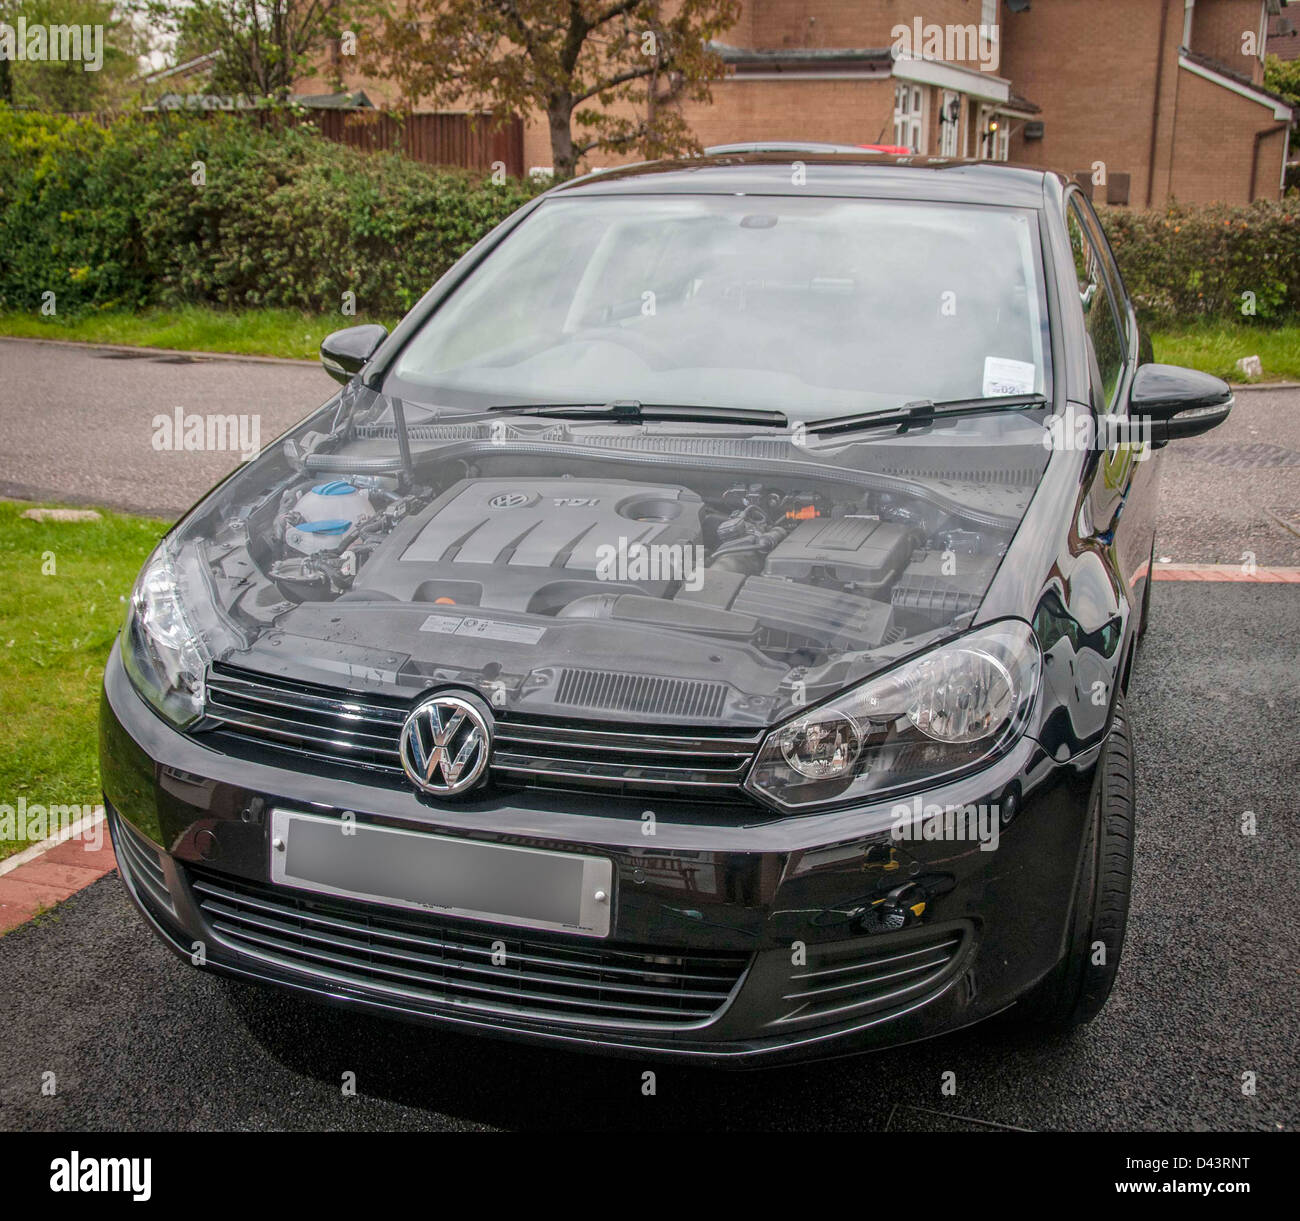 Volkswagen Golf car with engine visible through bonnet Stock Photo - Alamy